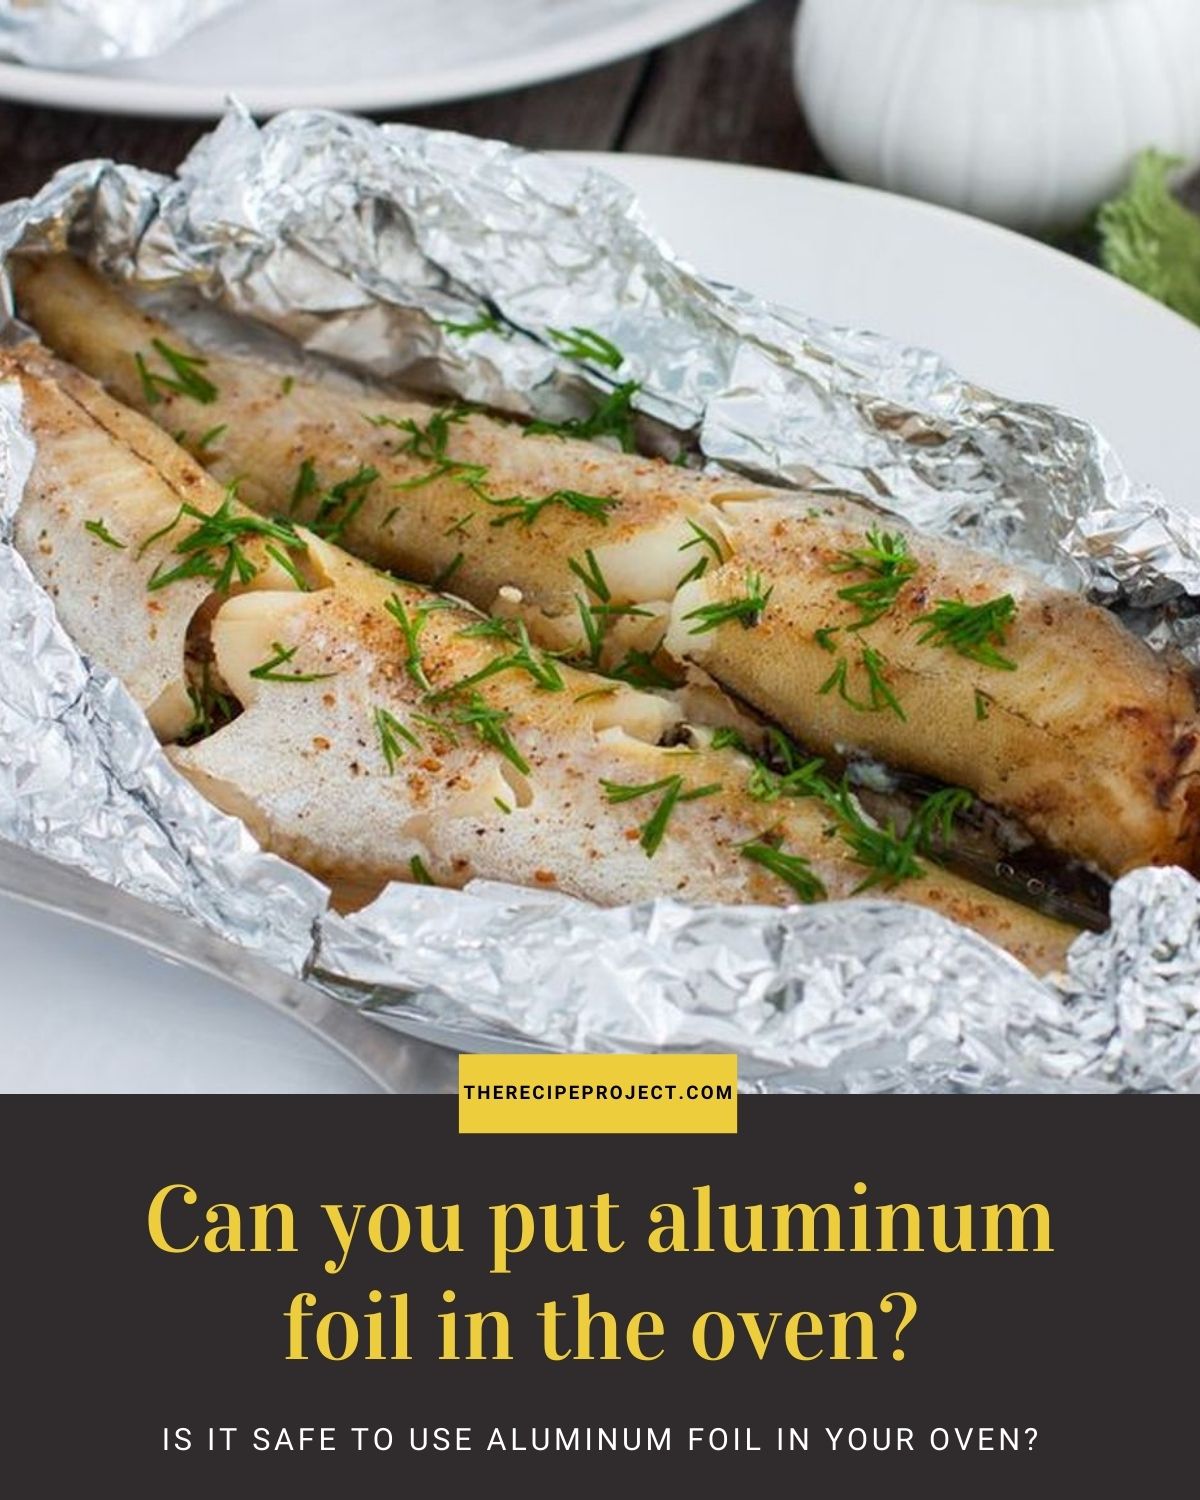 why can you put aluminum foil in the oven